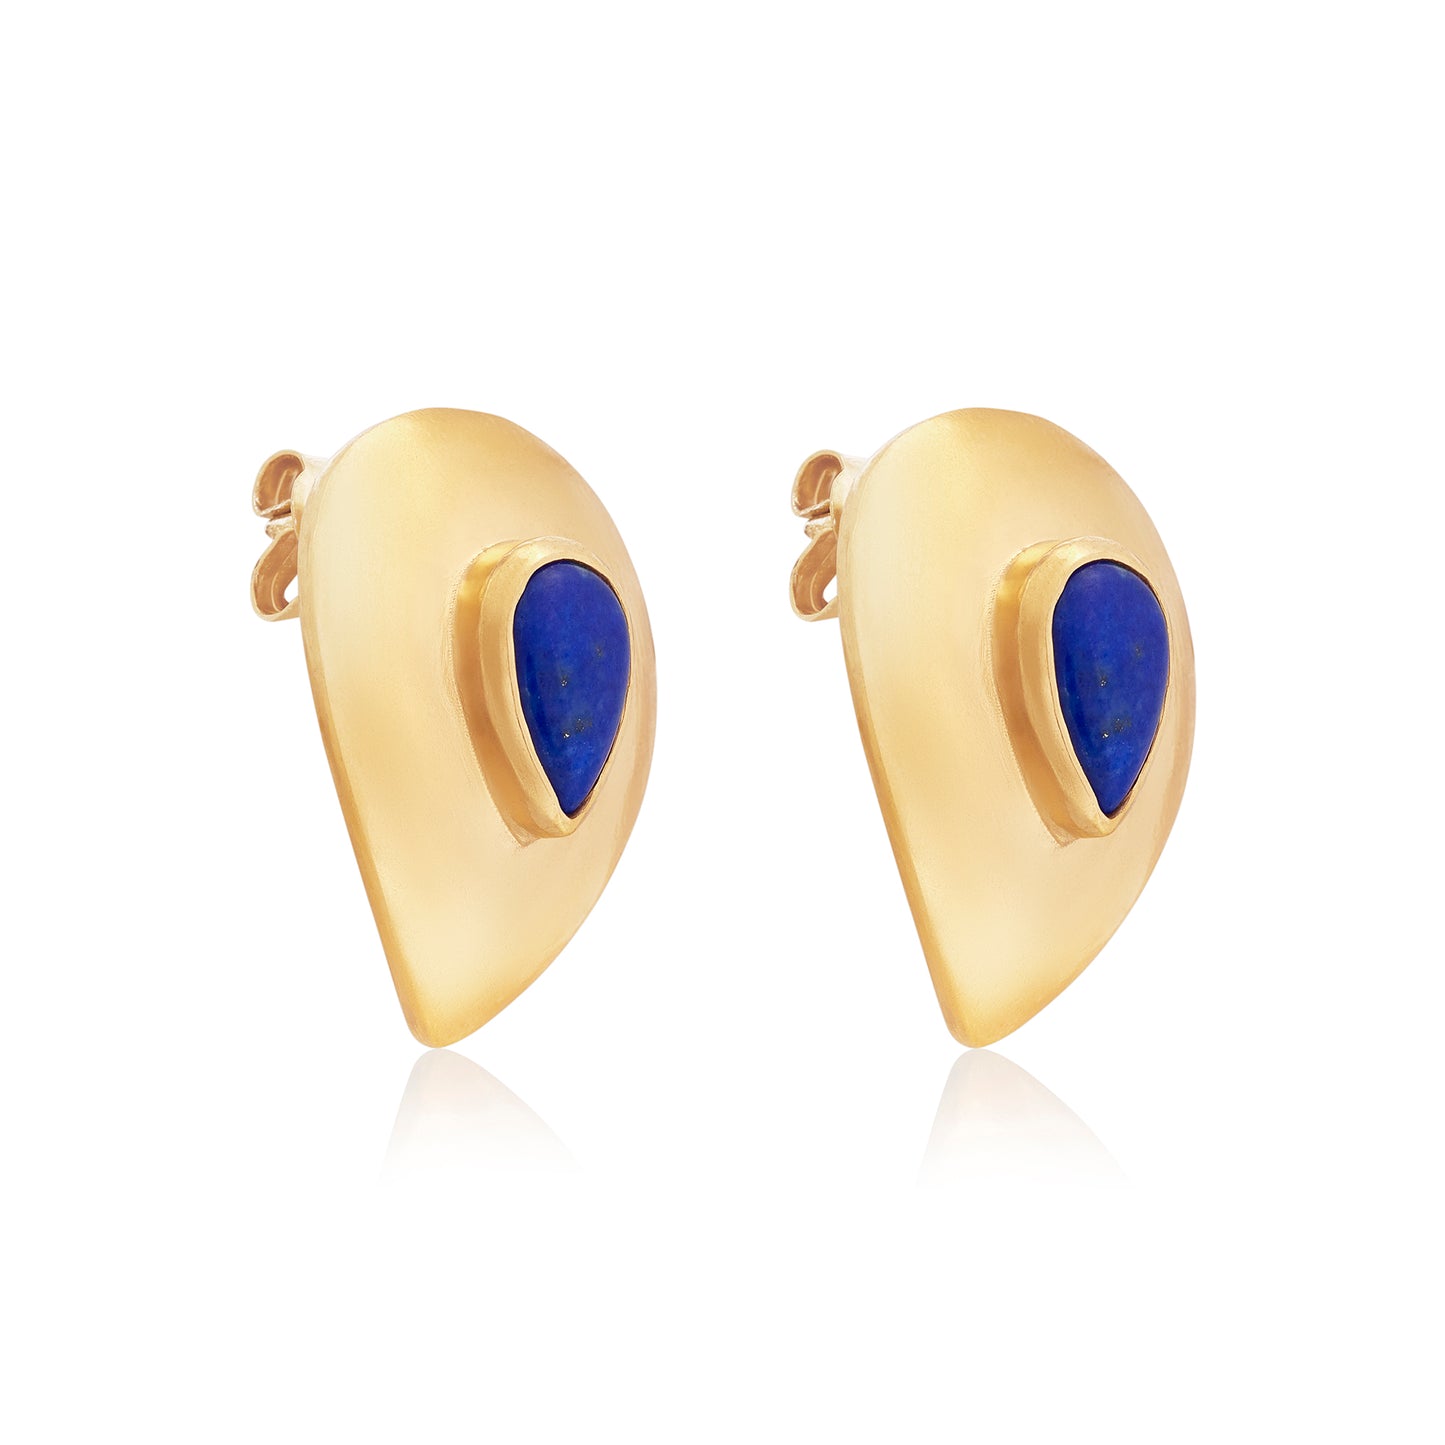 Franklin, John - Gold Plated Earrings with Lapis Lazuli